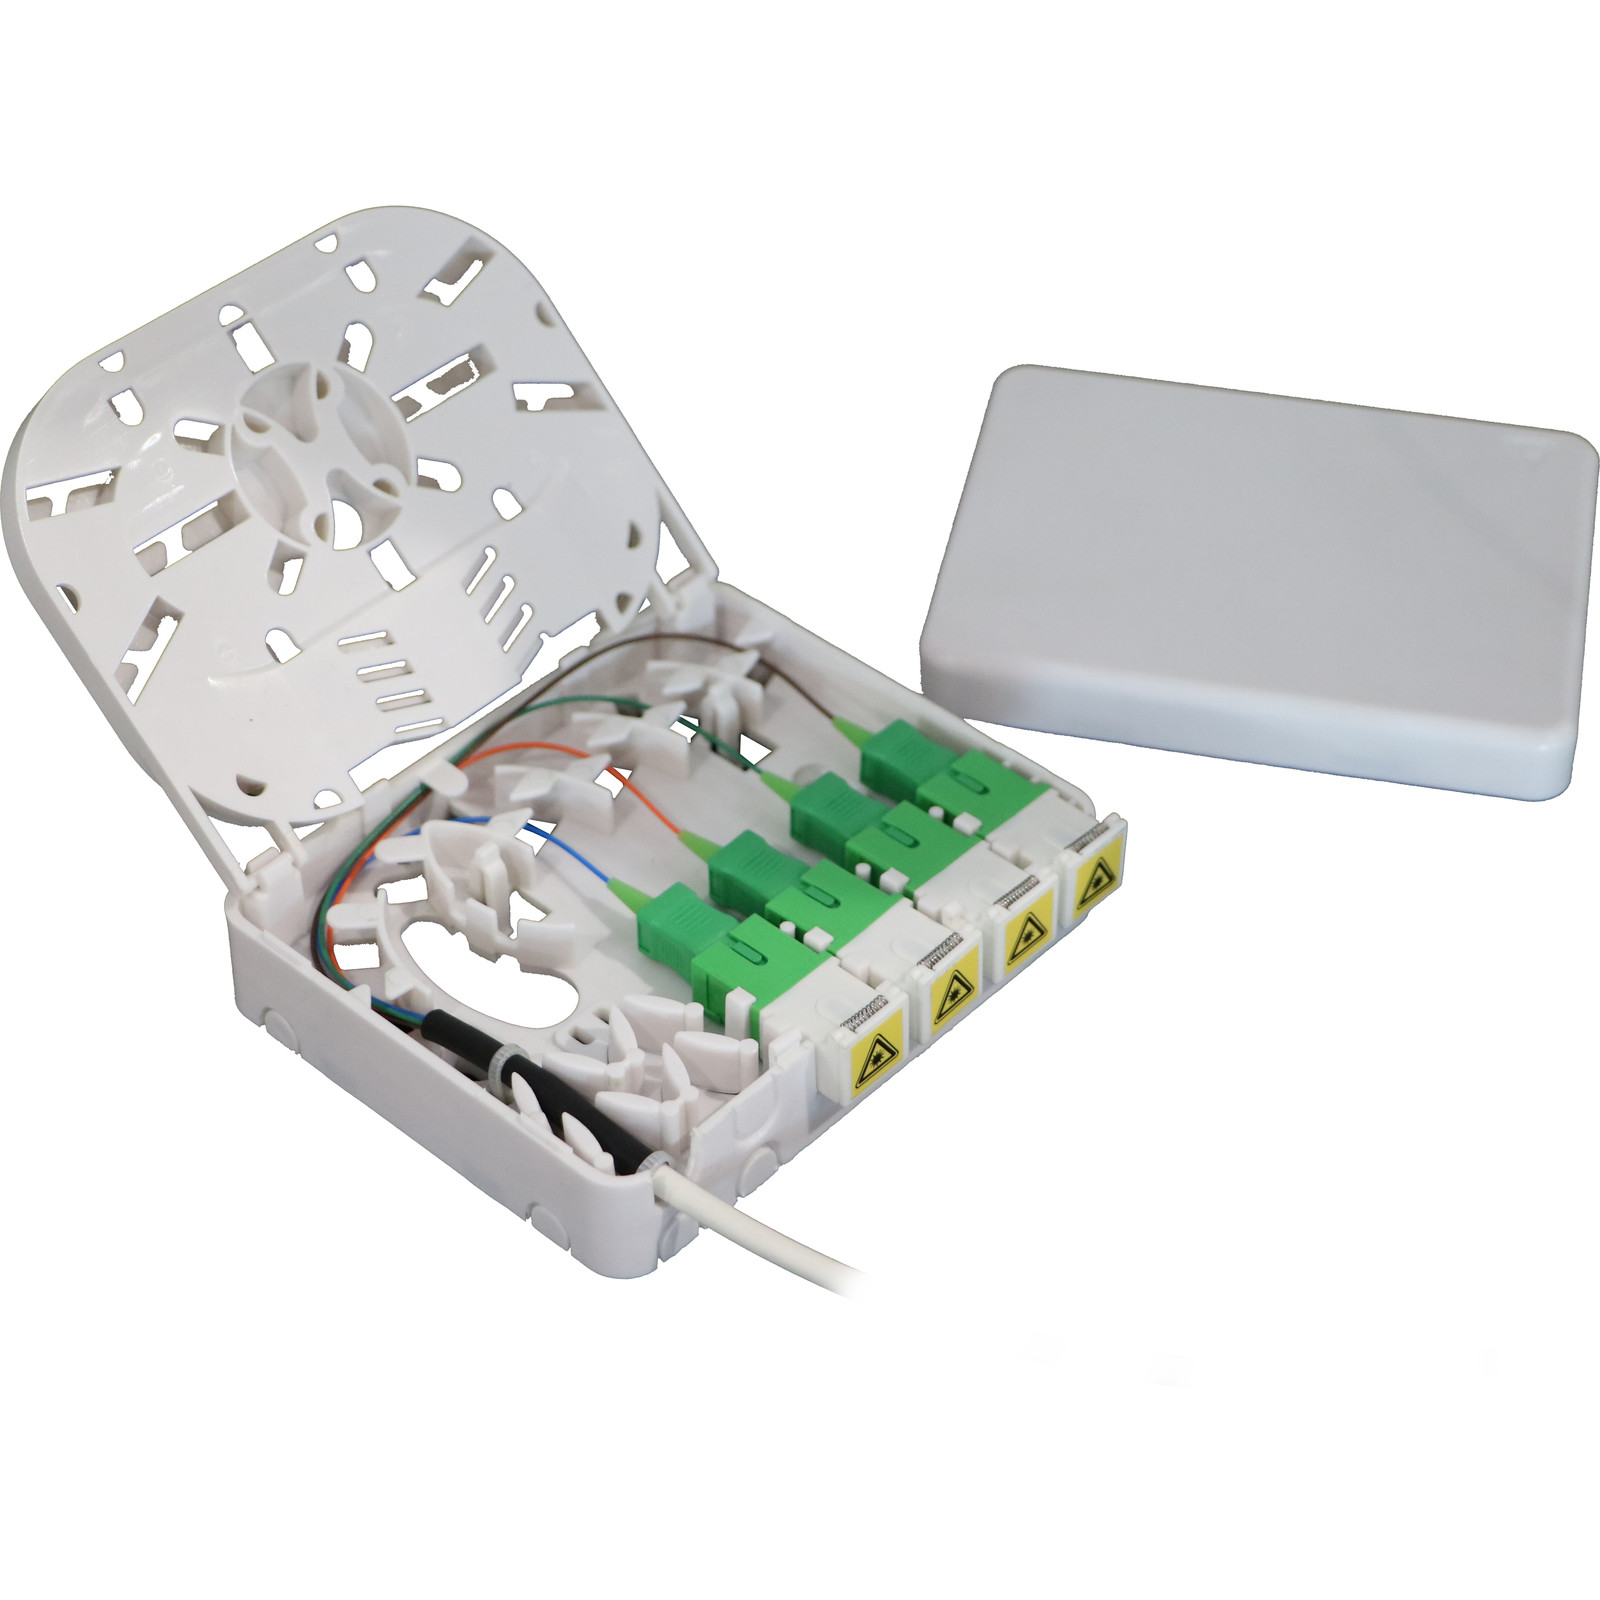 Enbeam FTTH 4 Port SC Outlet with 50m drop Cable